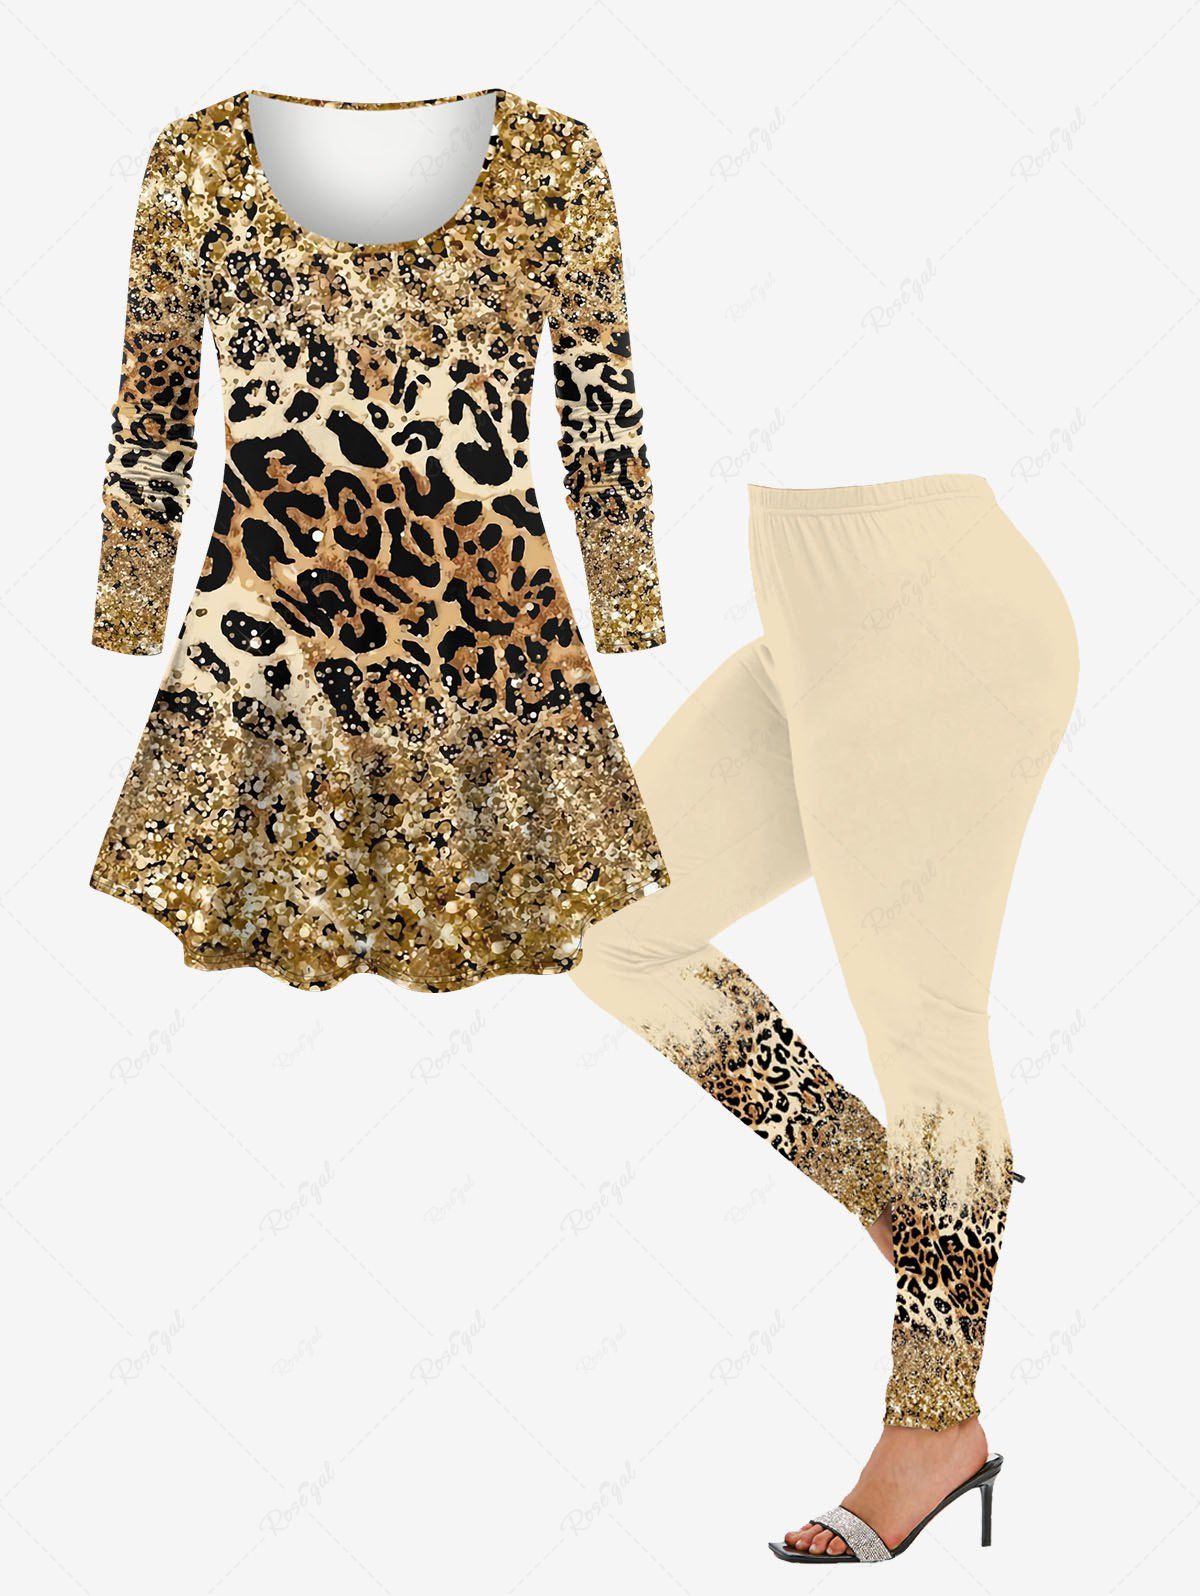 Chic Leopard Sparkling Sequin Glitter 3D Printed Long Sleeve T-shirt and Leggings Plus Size Matching Set  